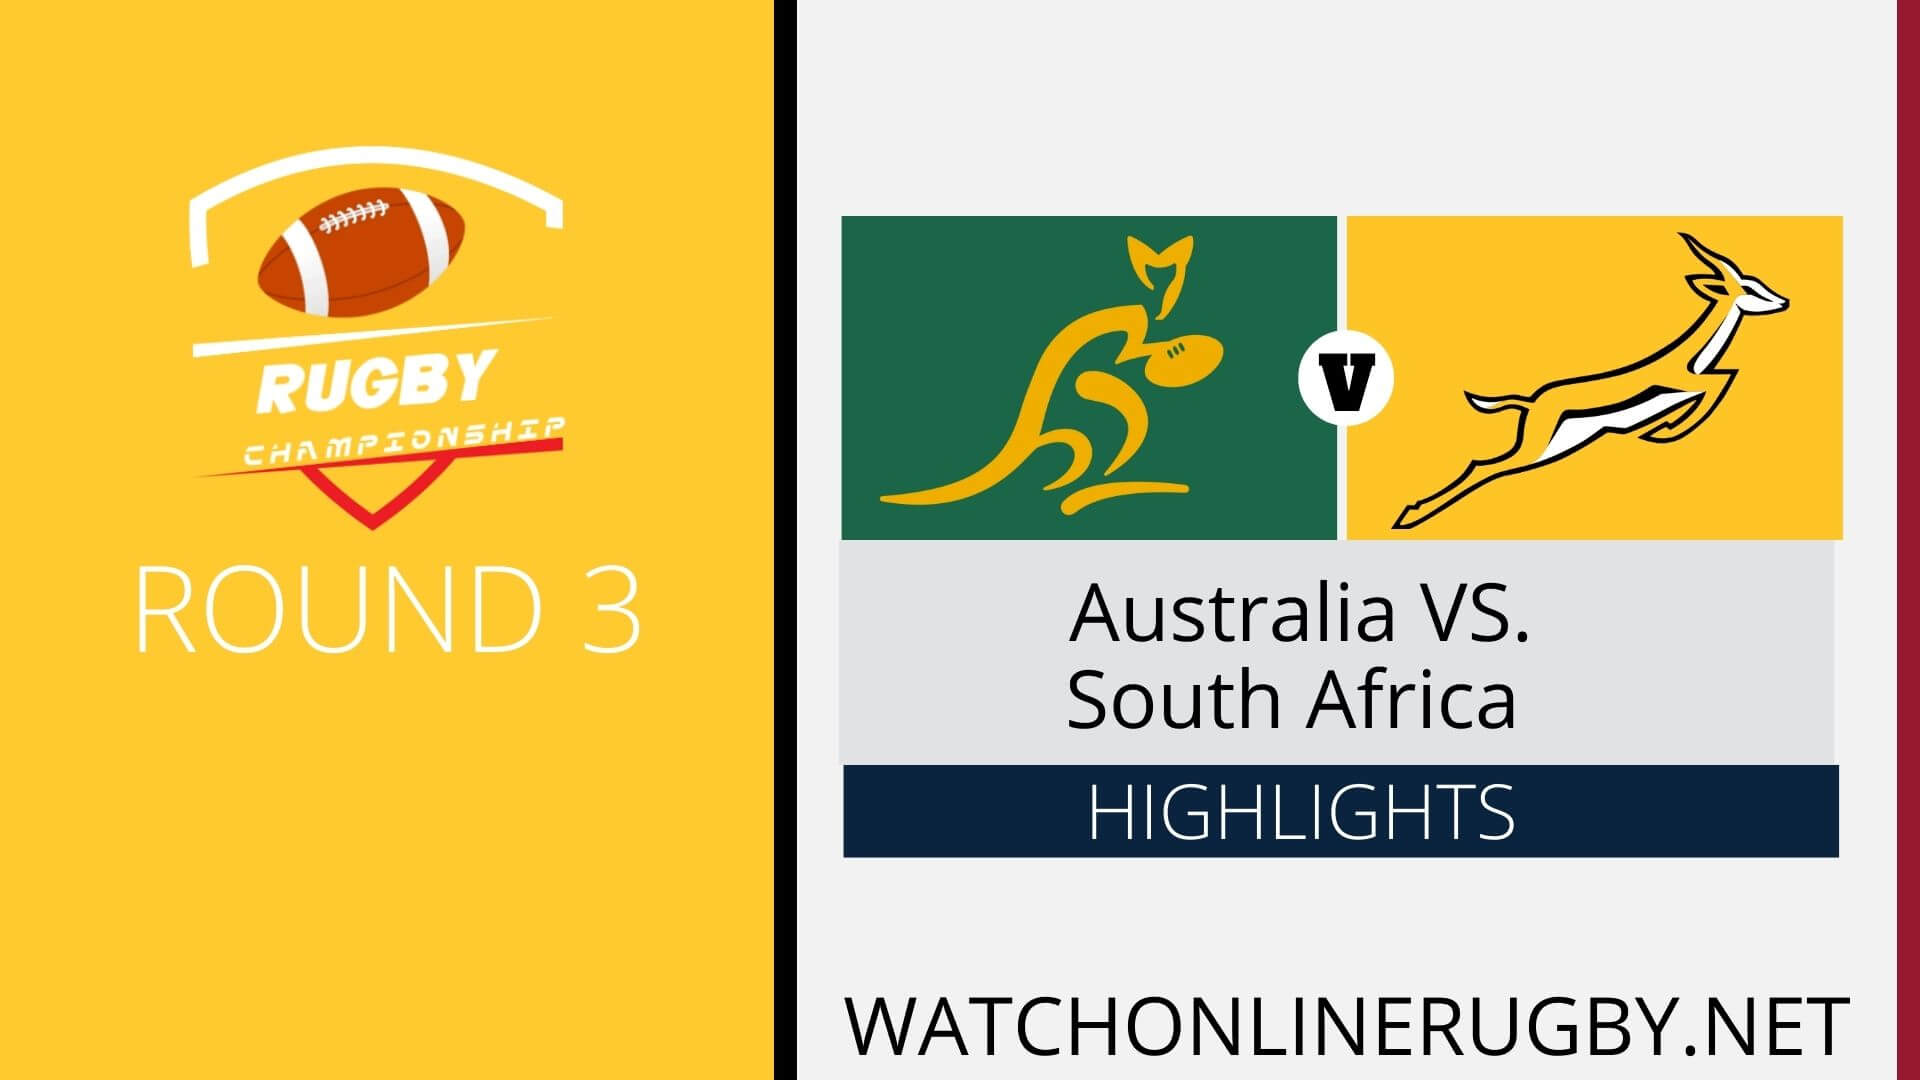 Australia Vs South Africa Rugby Championship 2022 RD 3